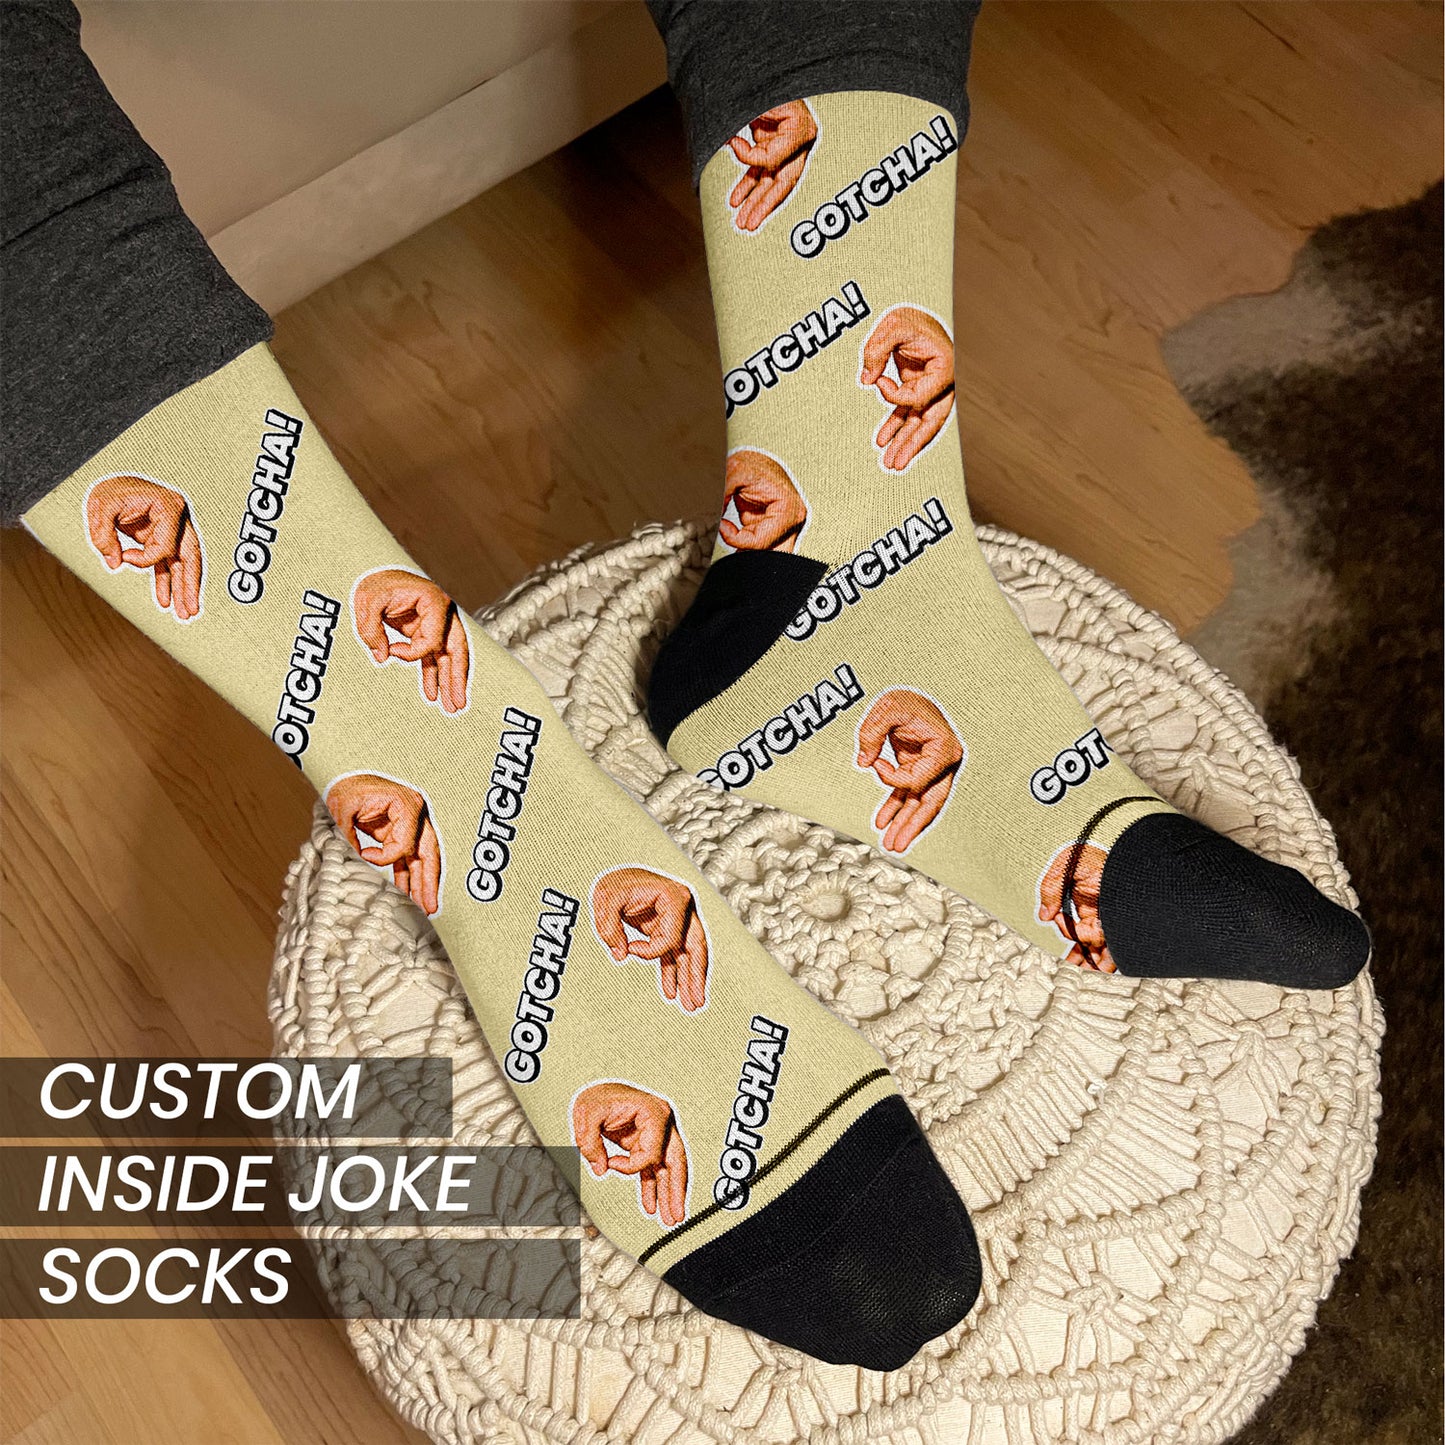 inside joke gift socks personalized with objects and text on man's feet